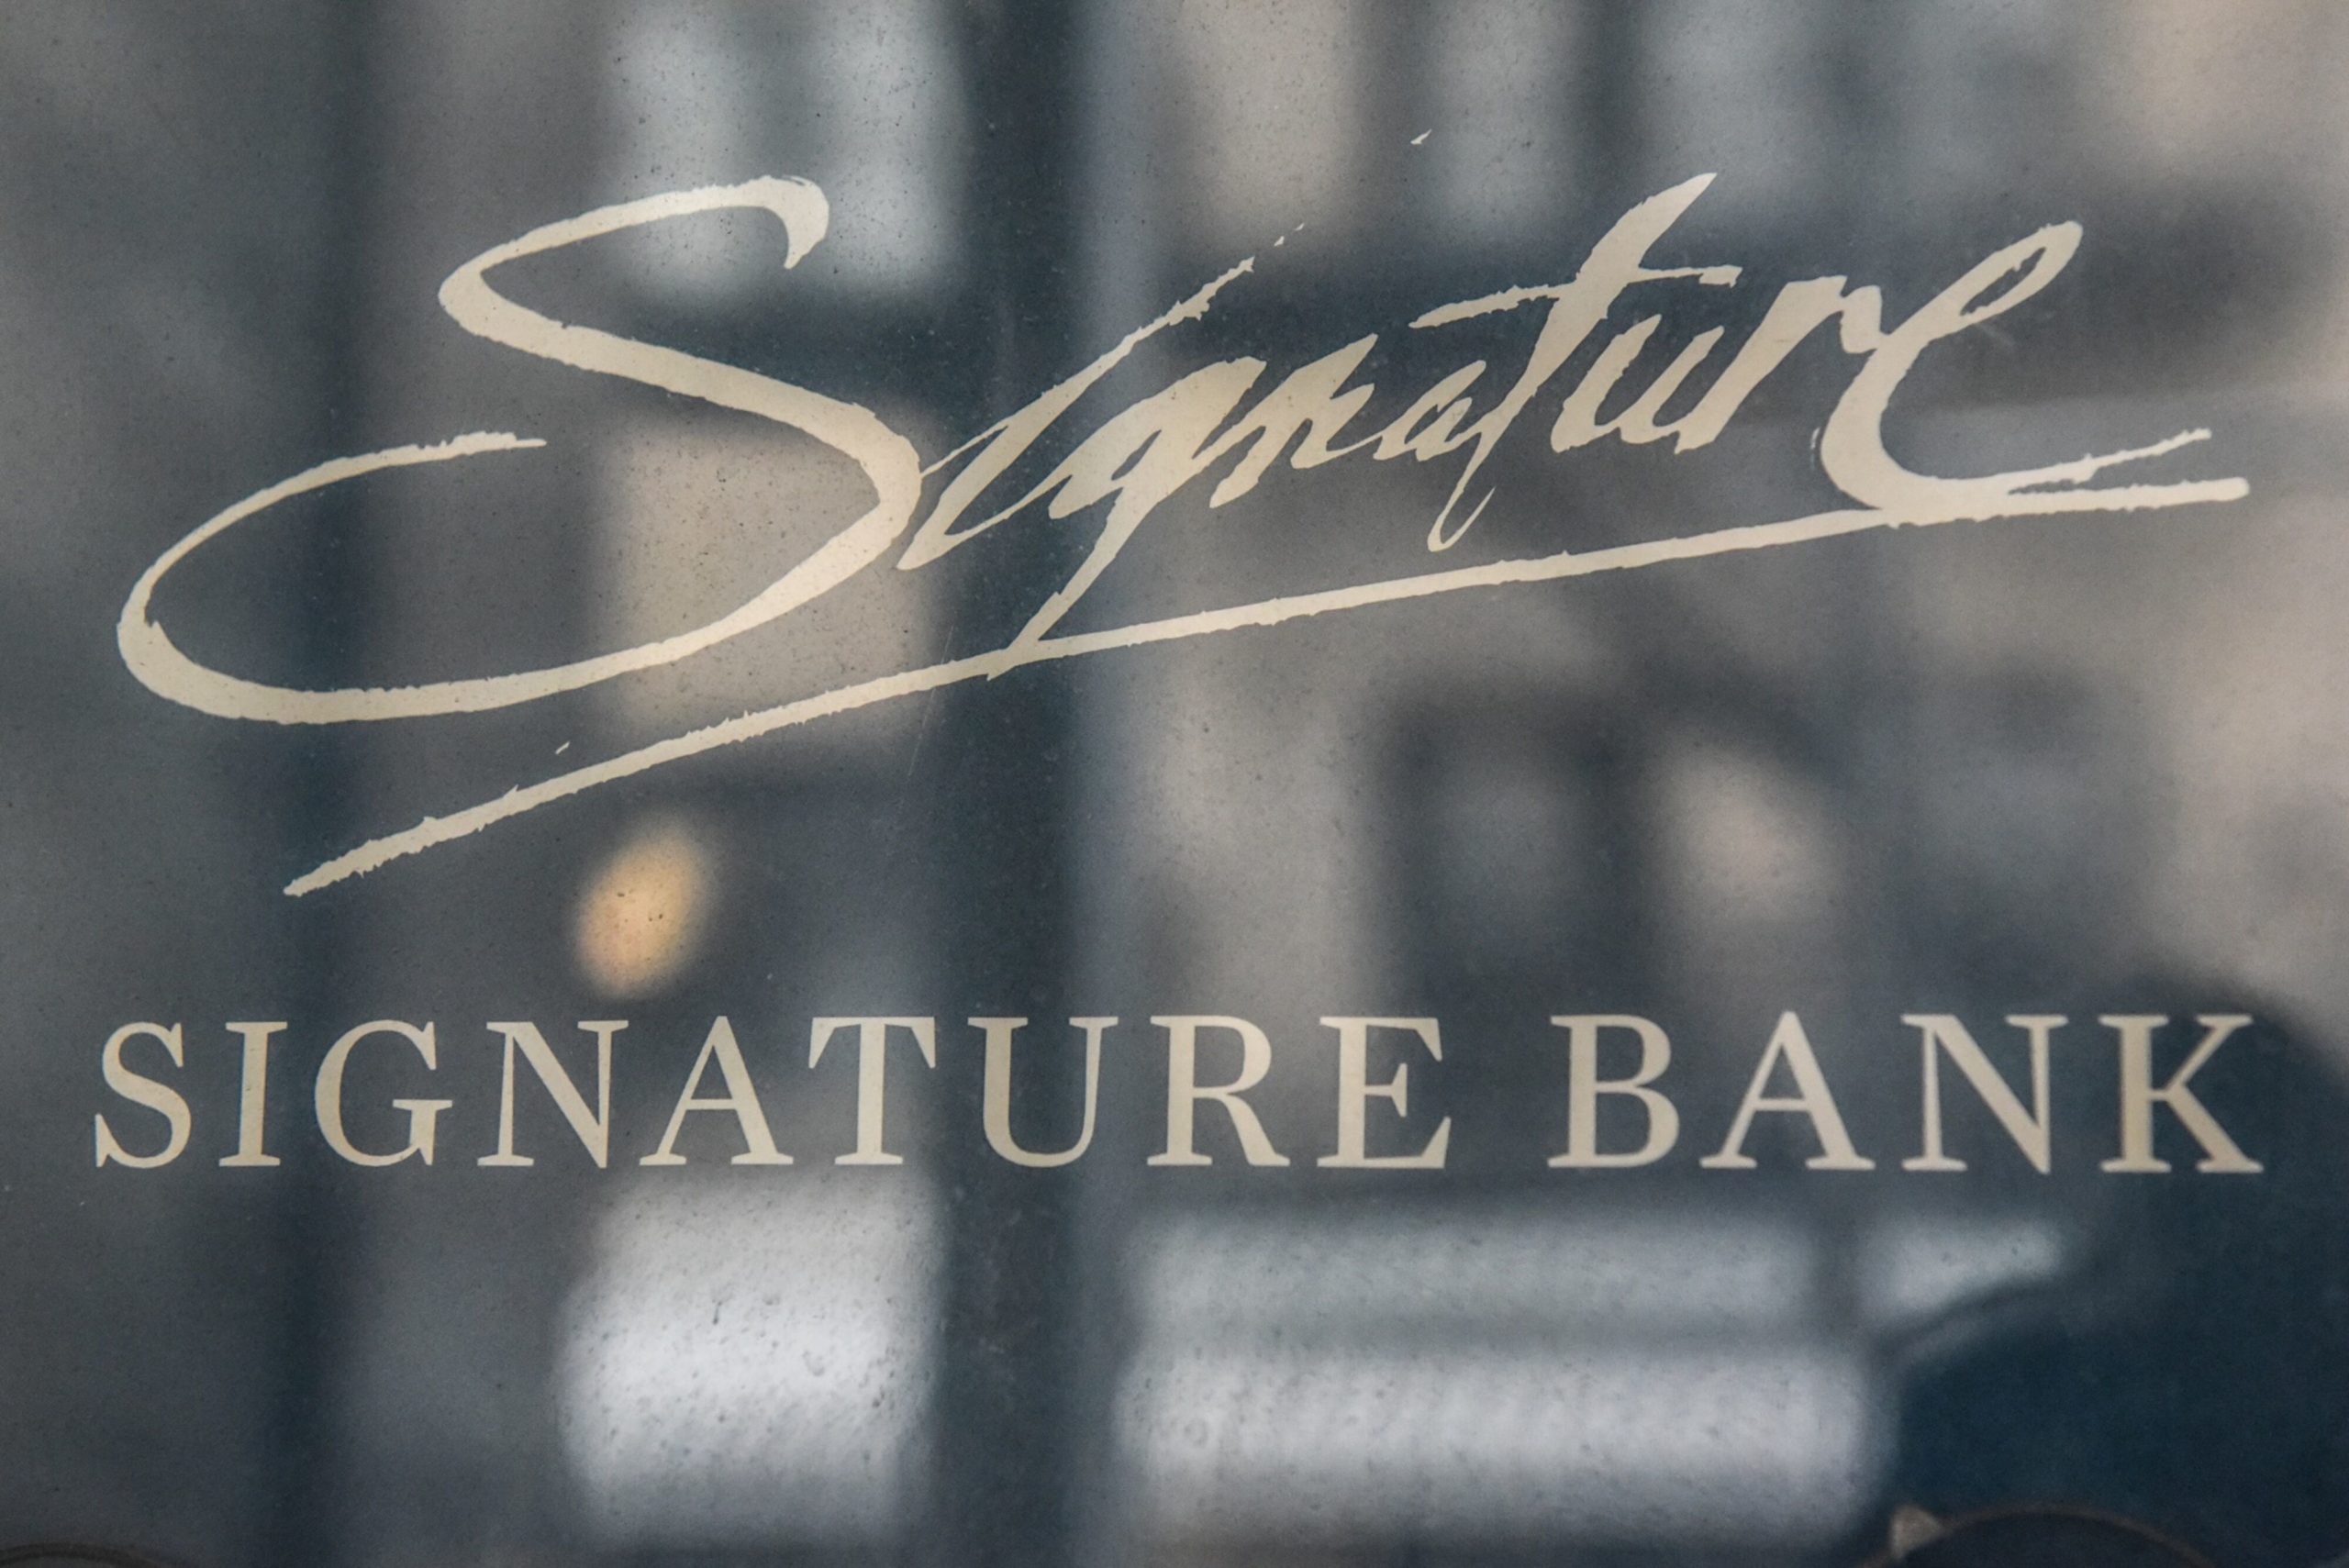 Signature Seized By Regulators As Pain Spreads From SVB’s Fall